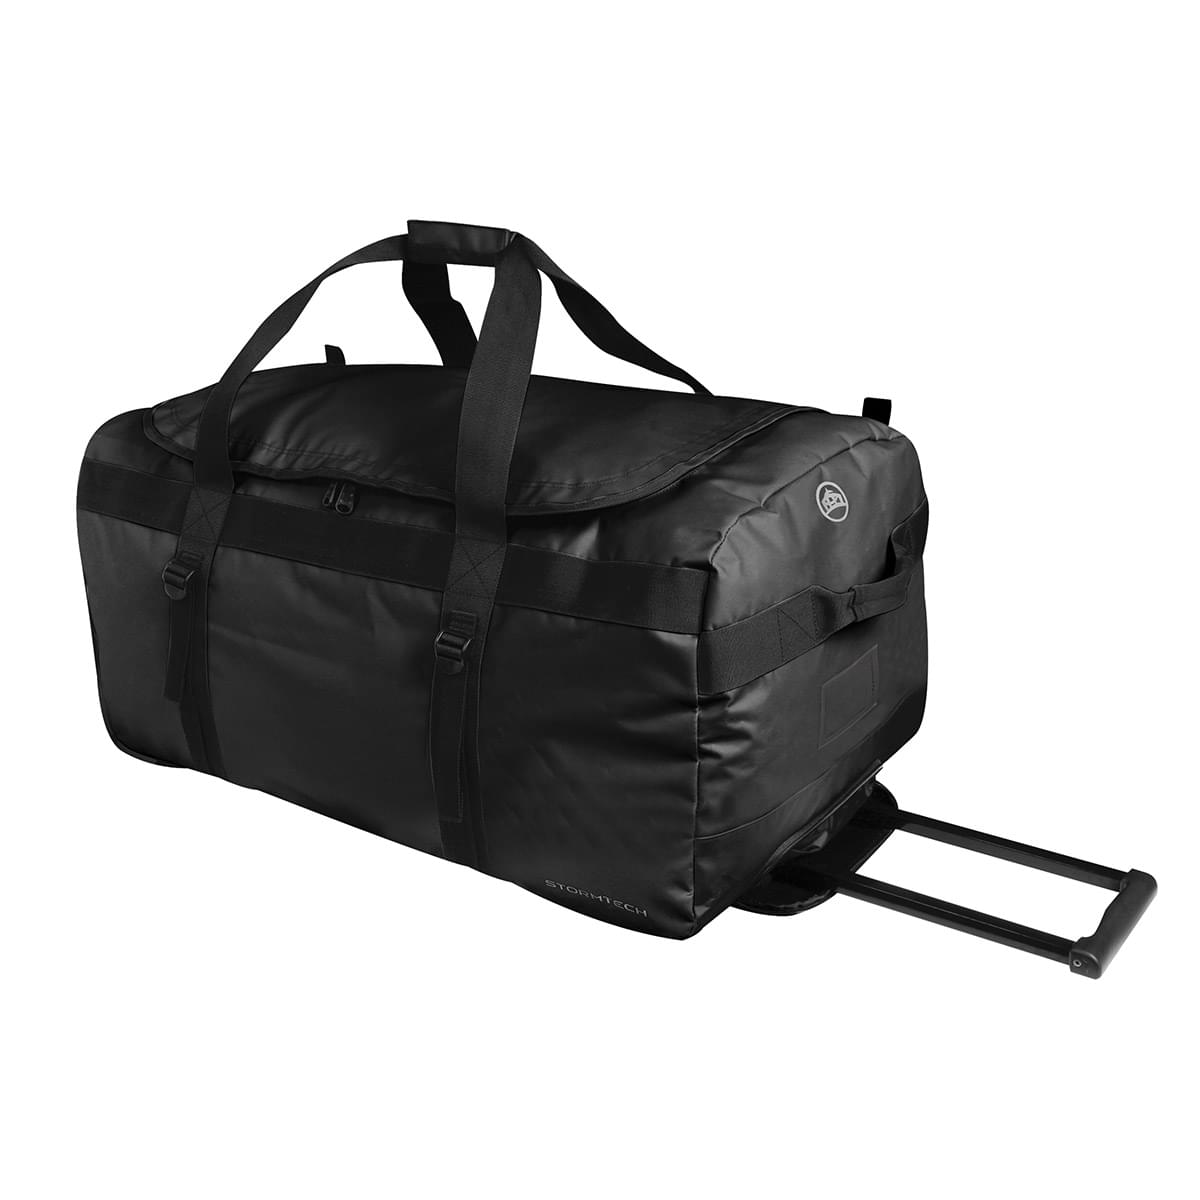 Starting point Polished hunt Trident Waterproof Duffel Bag - Stormtech Canada Retail